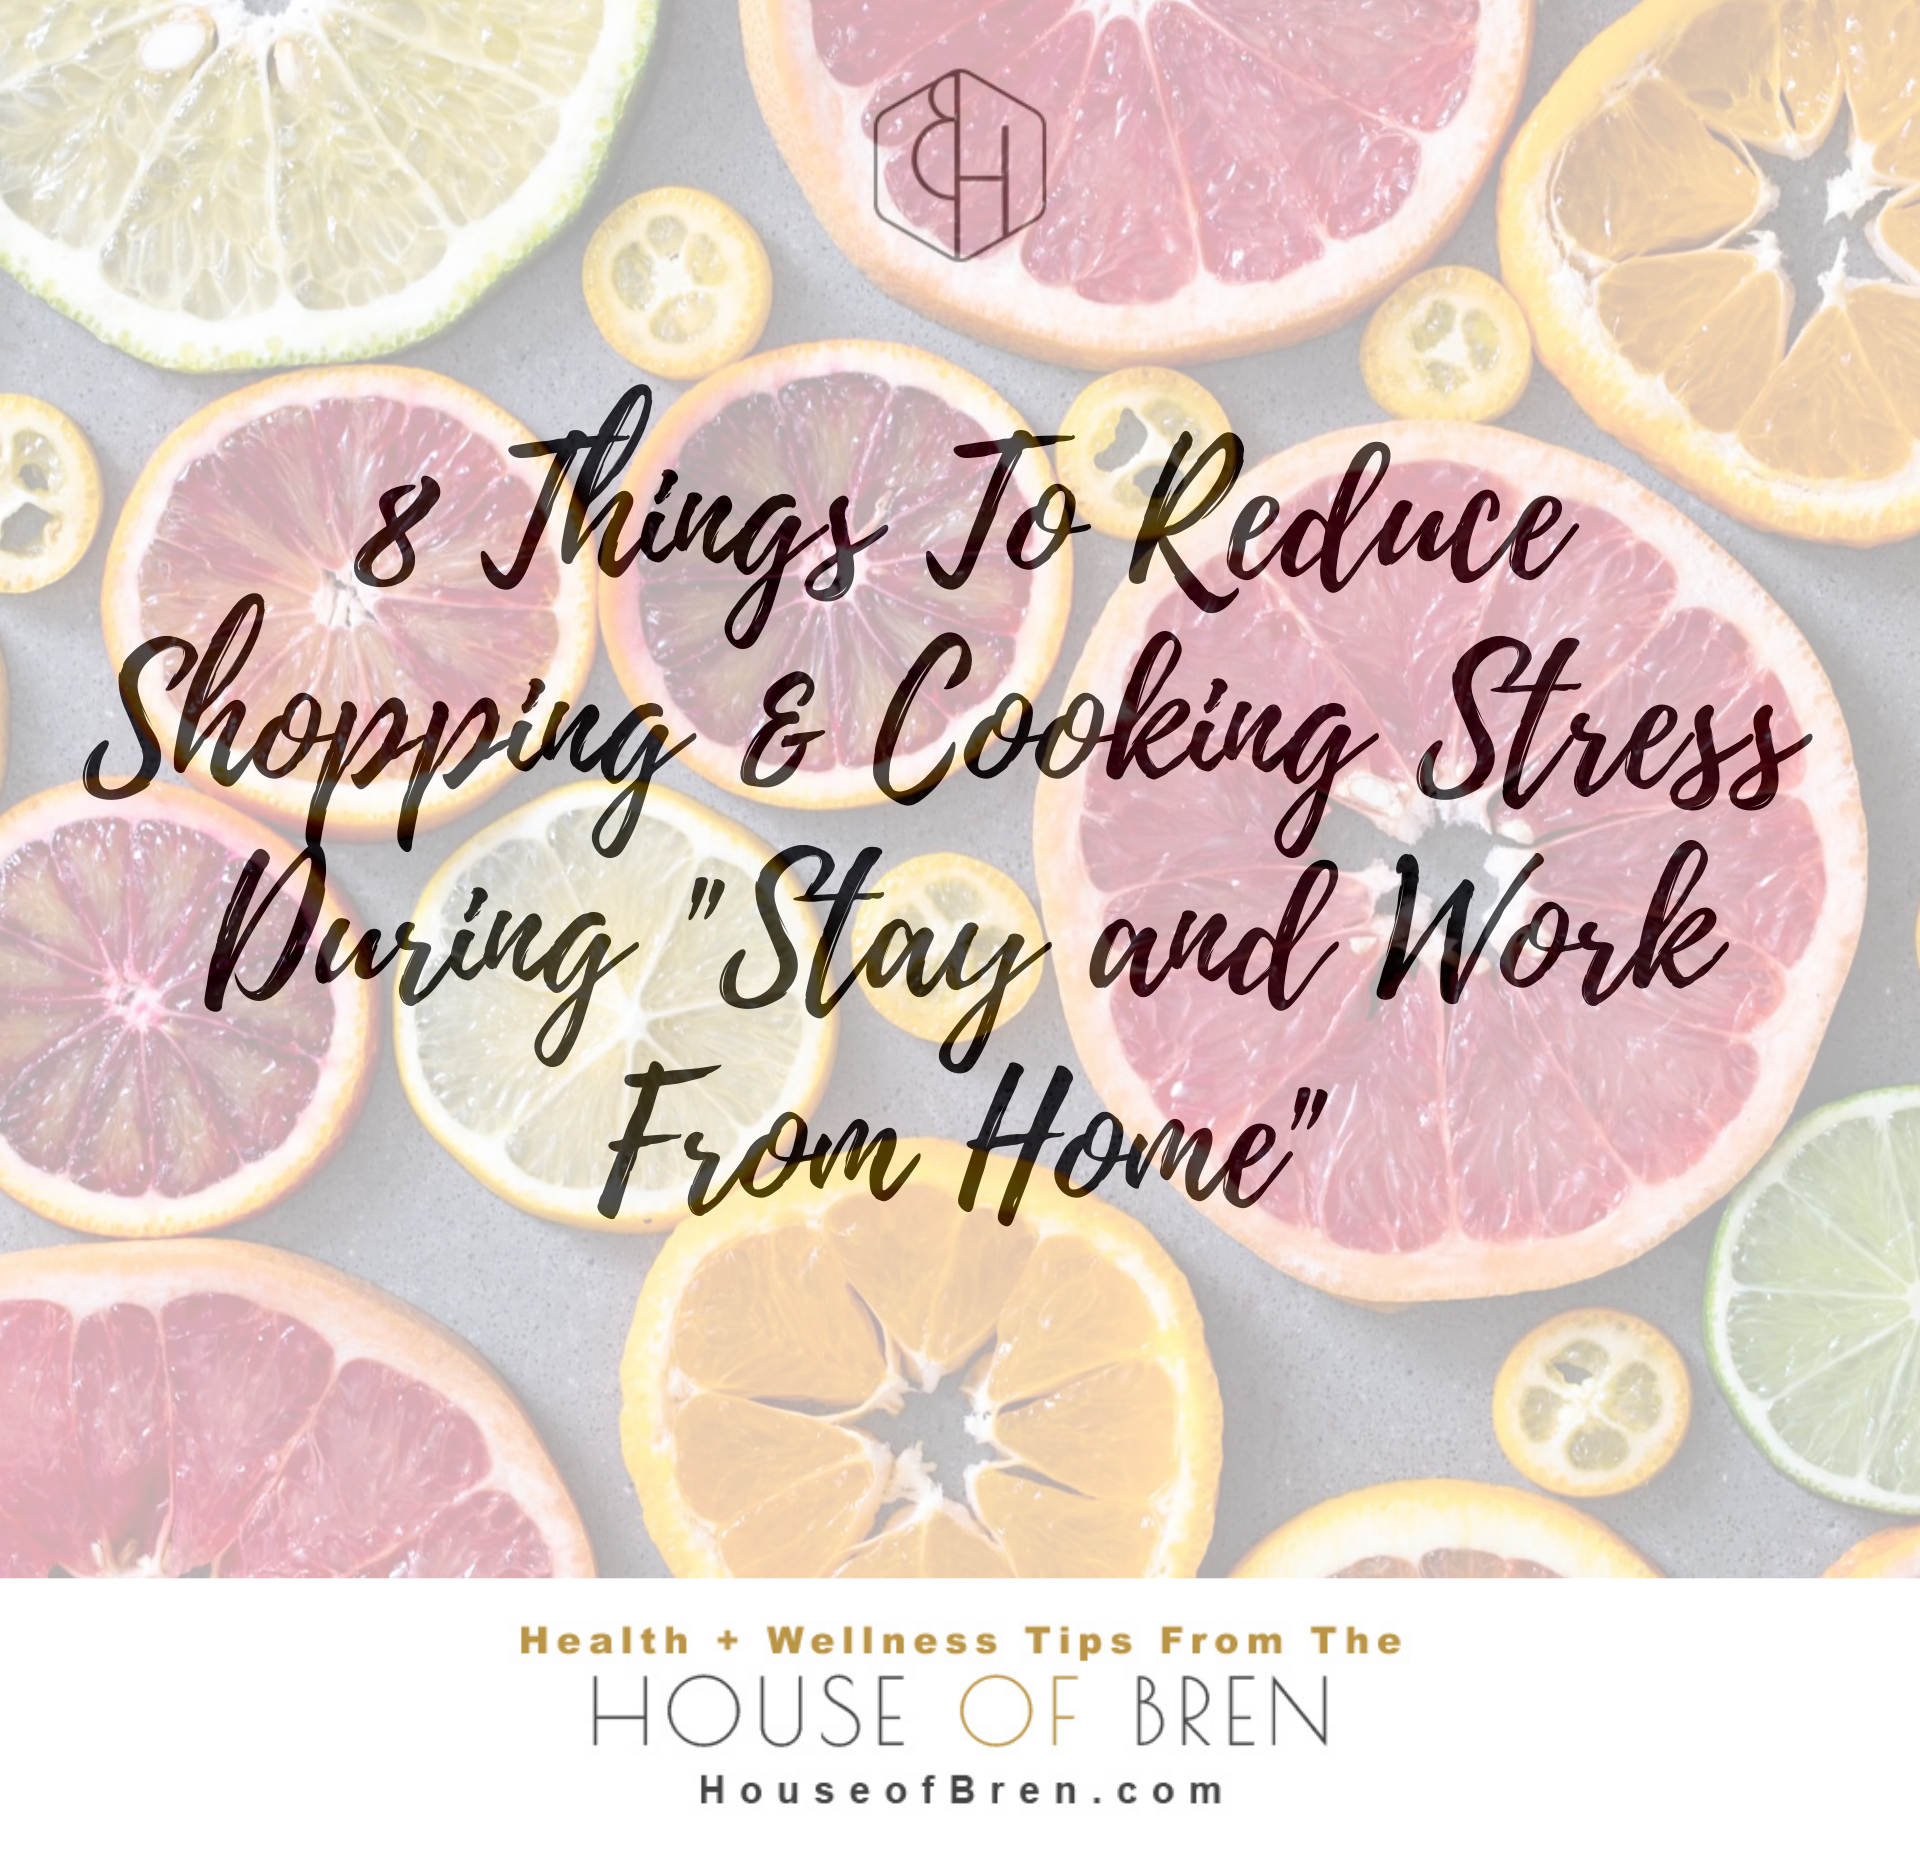 House of Bren WFH Tips for Stress-Free Shopping, Storing and Cooking